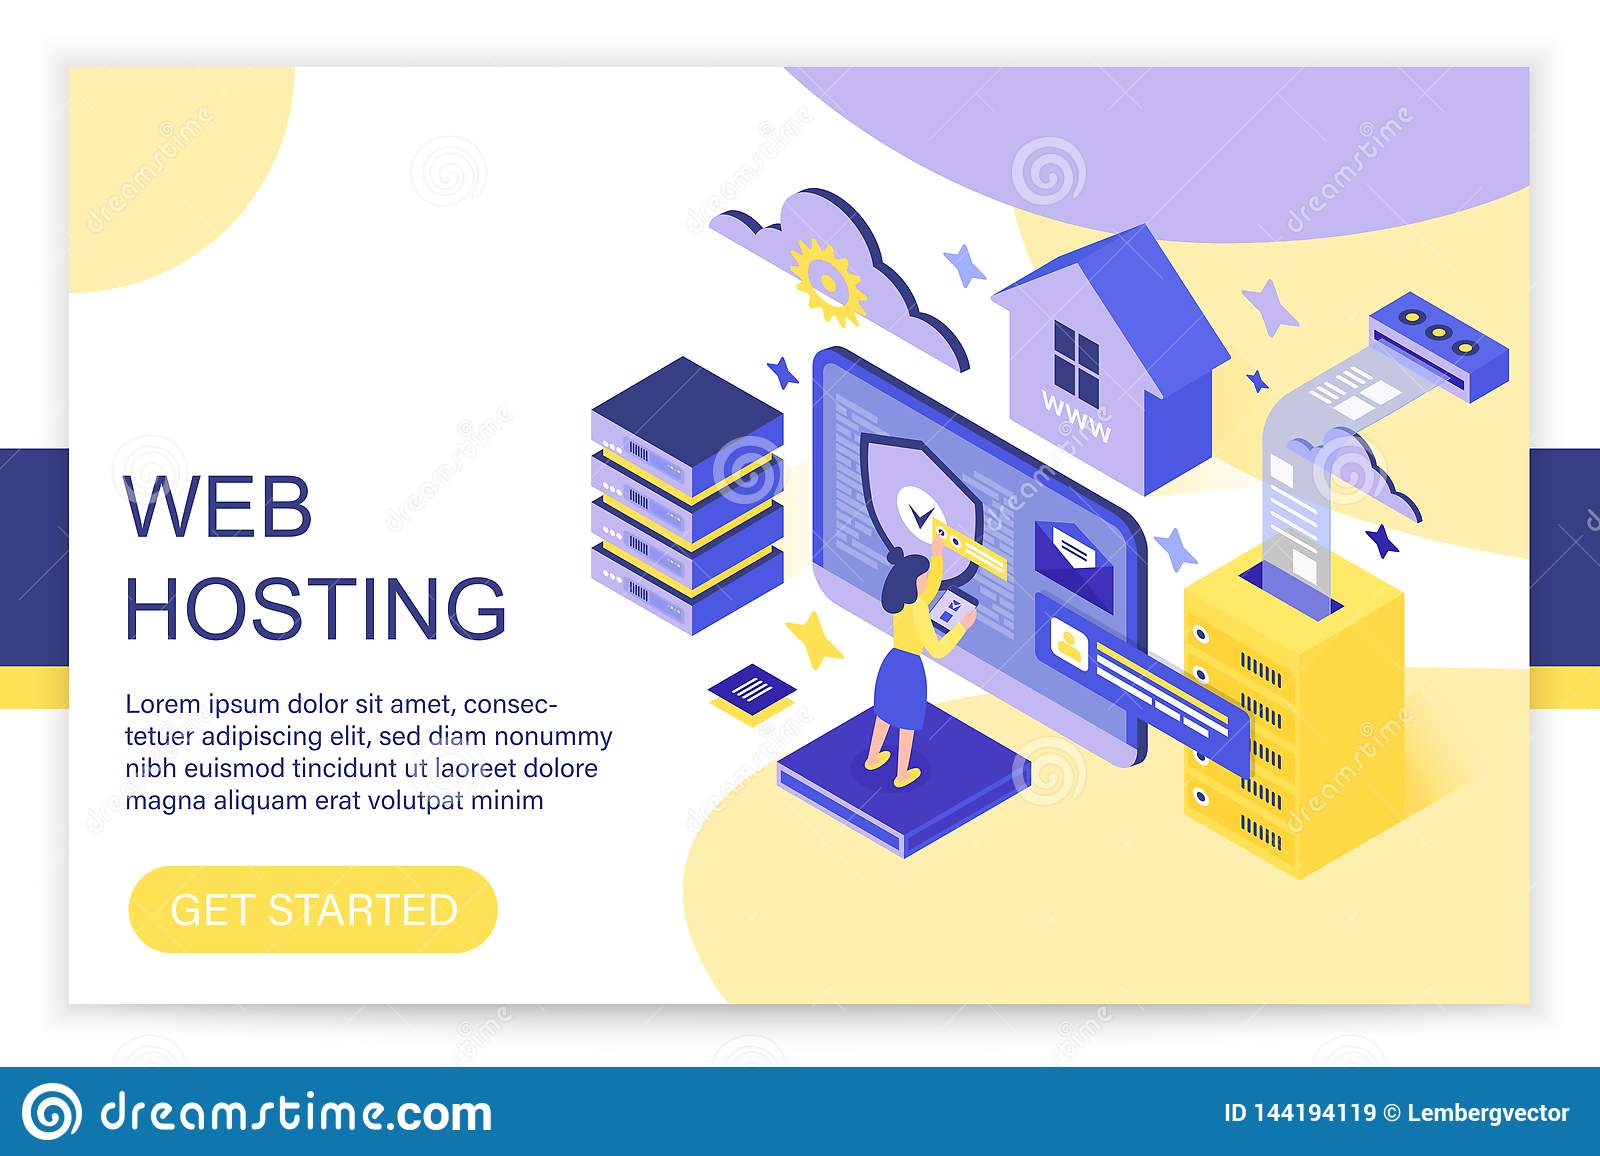 how much does aws web hosting cost